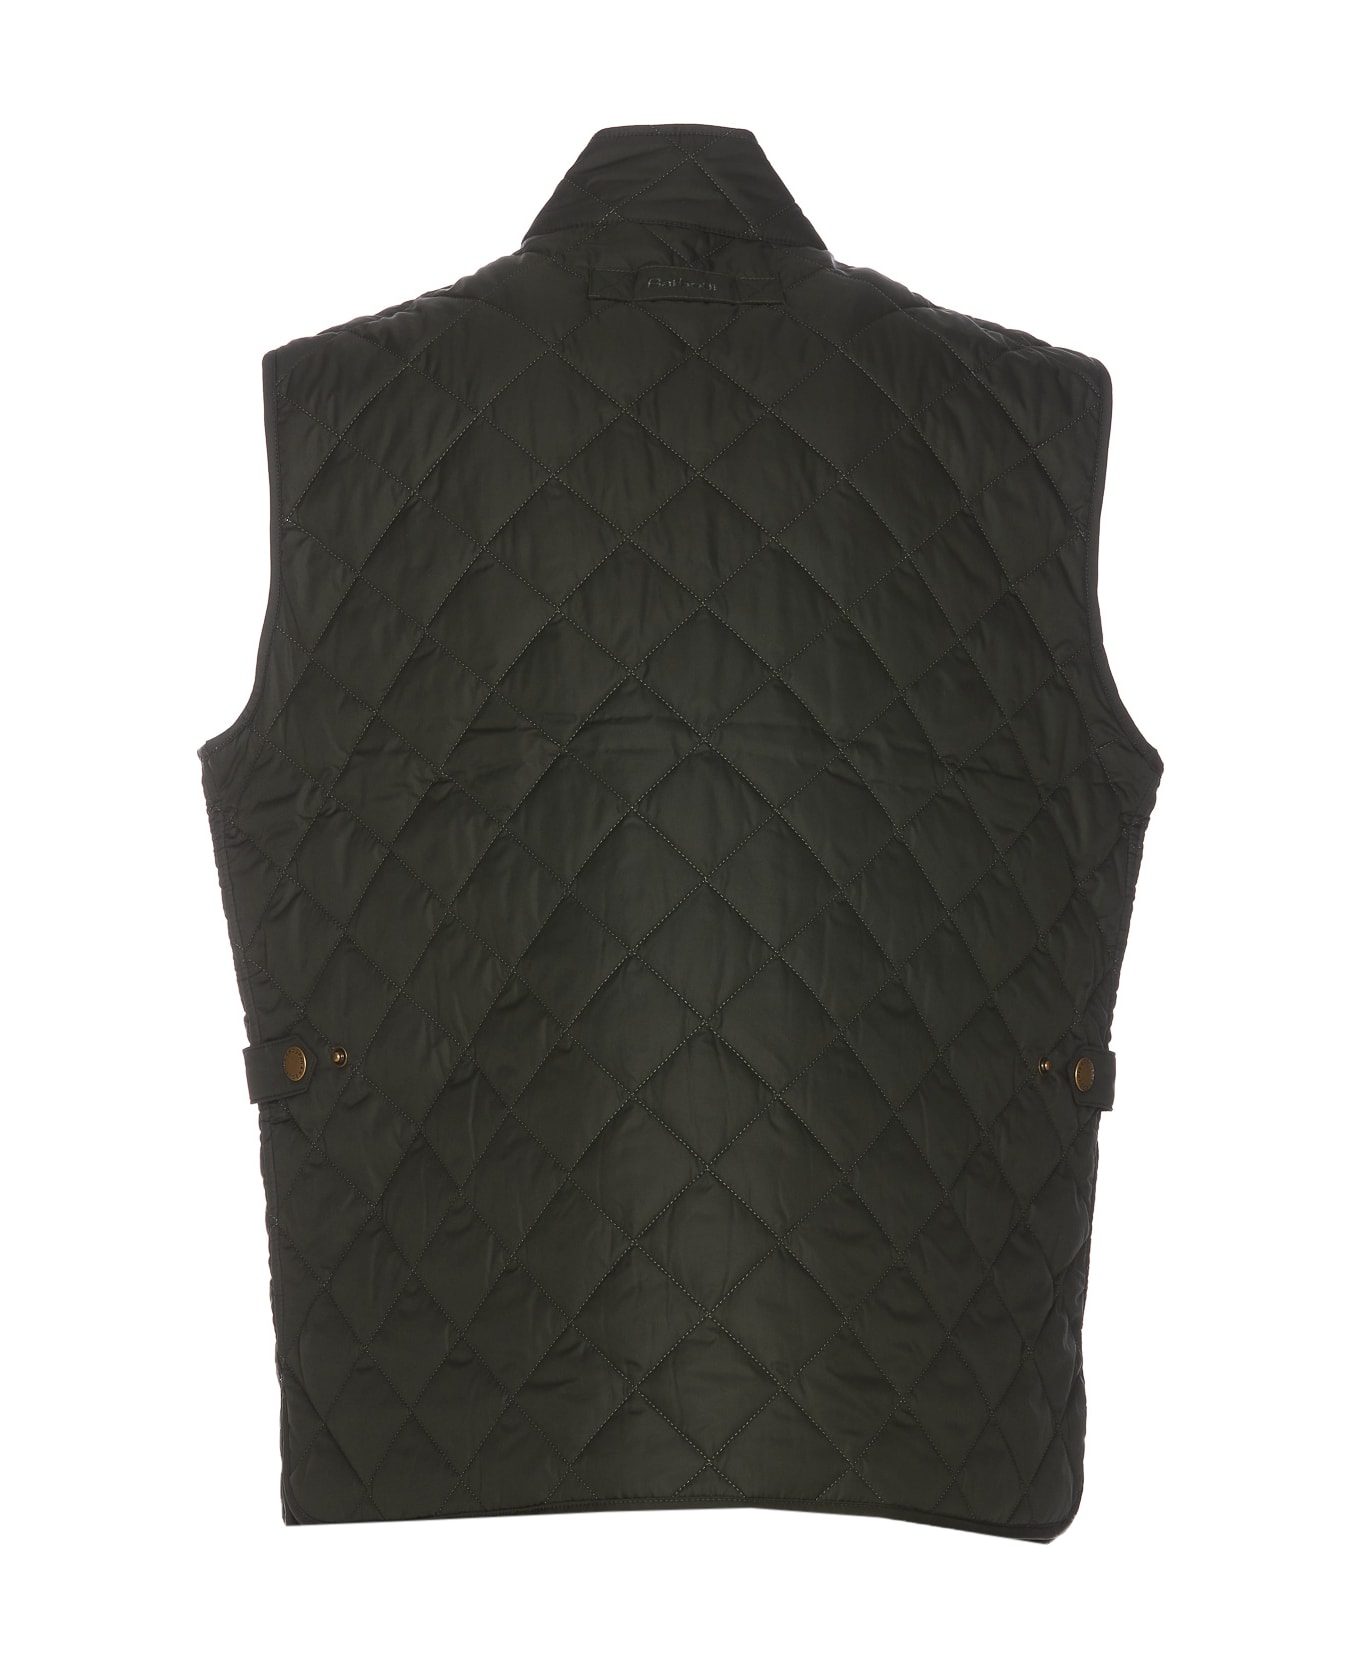 Barbour New Lowerdale Vest - Green